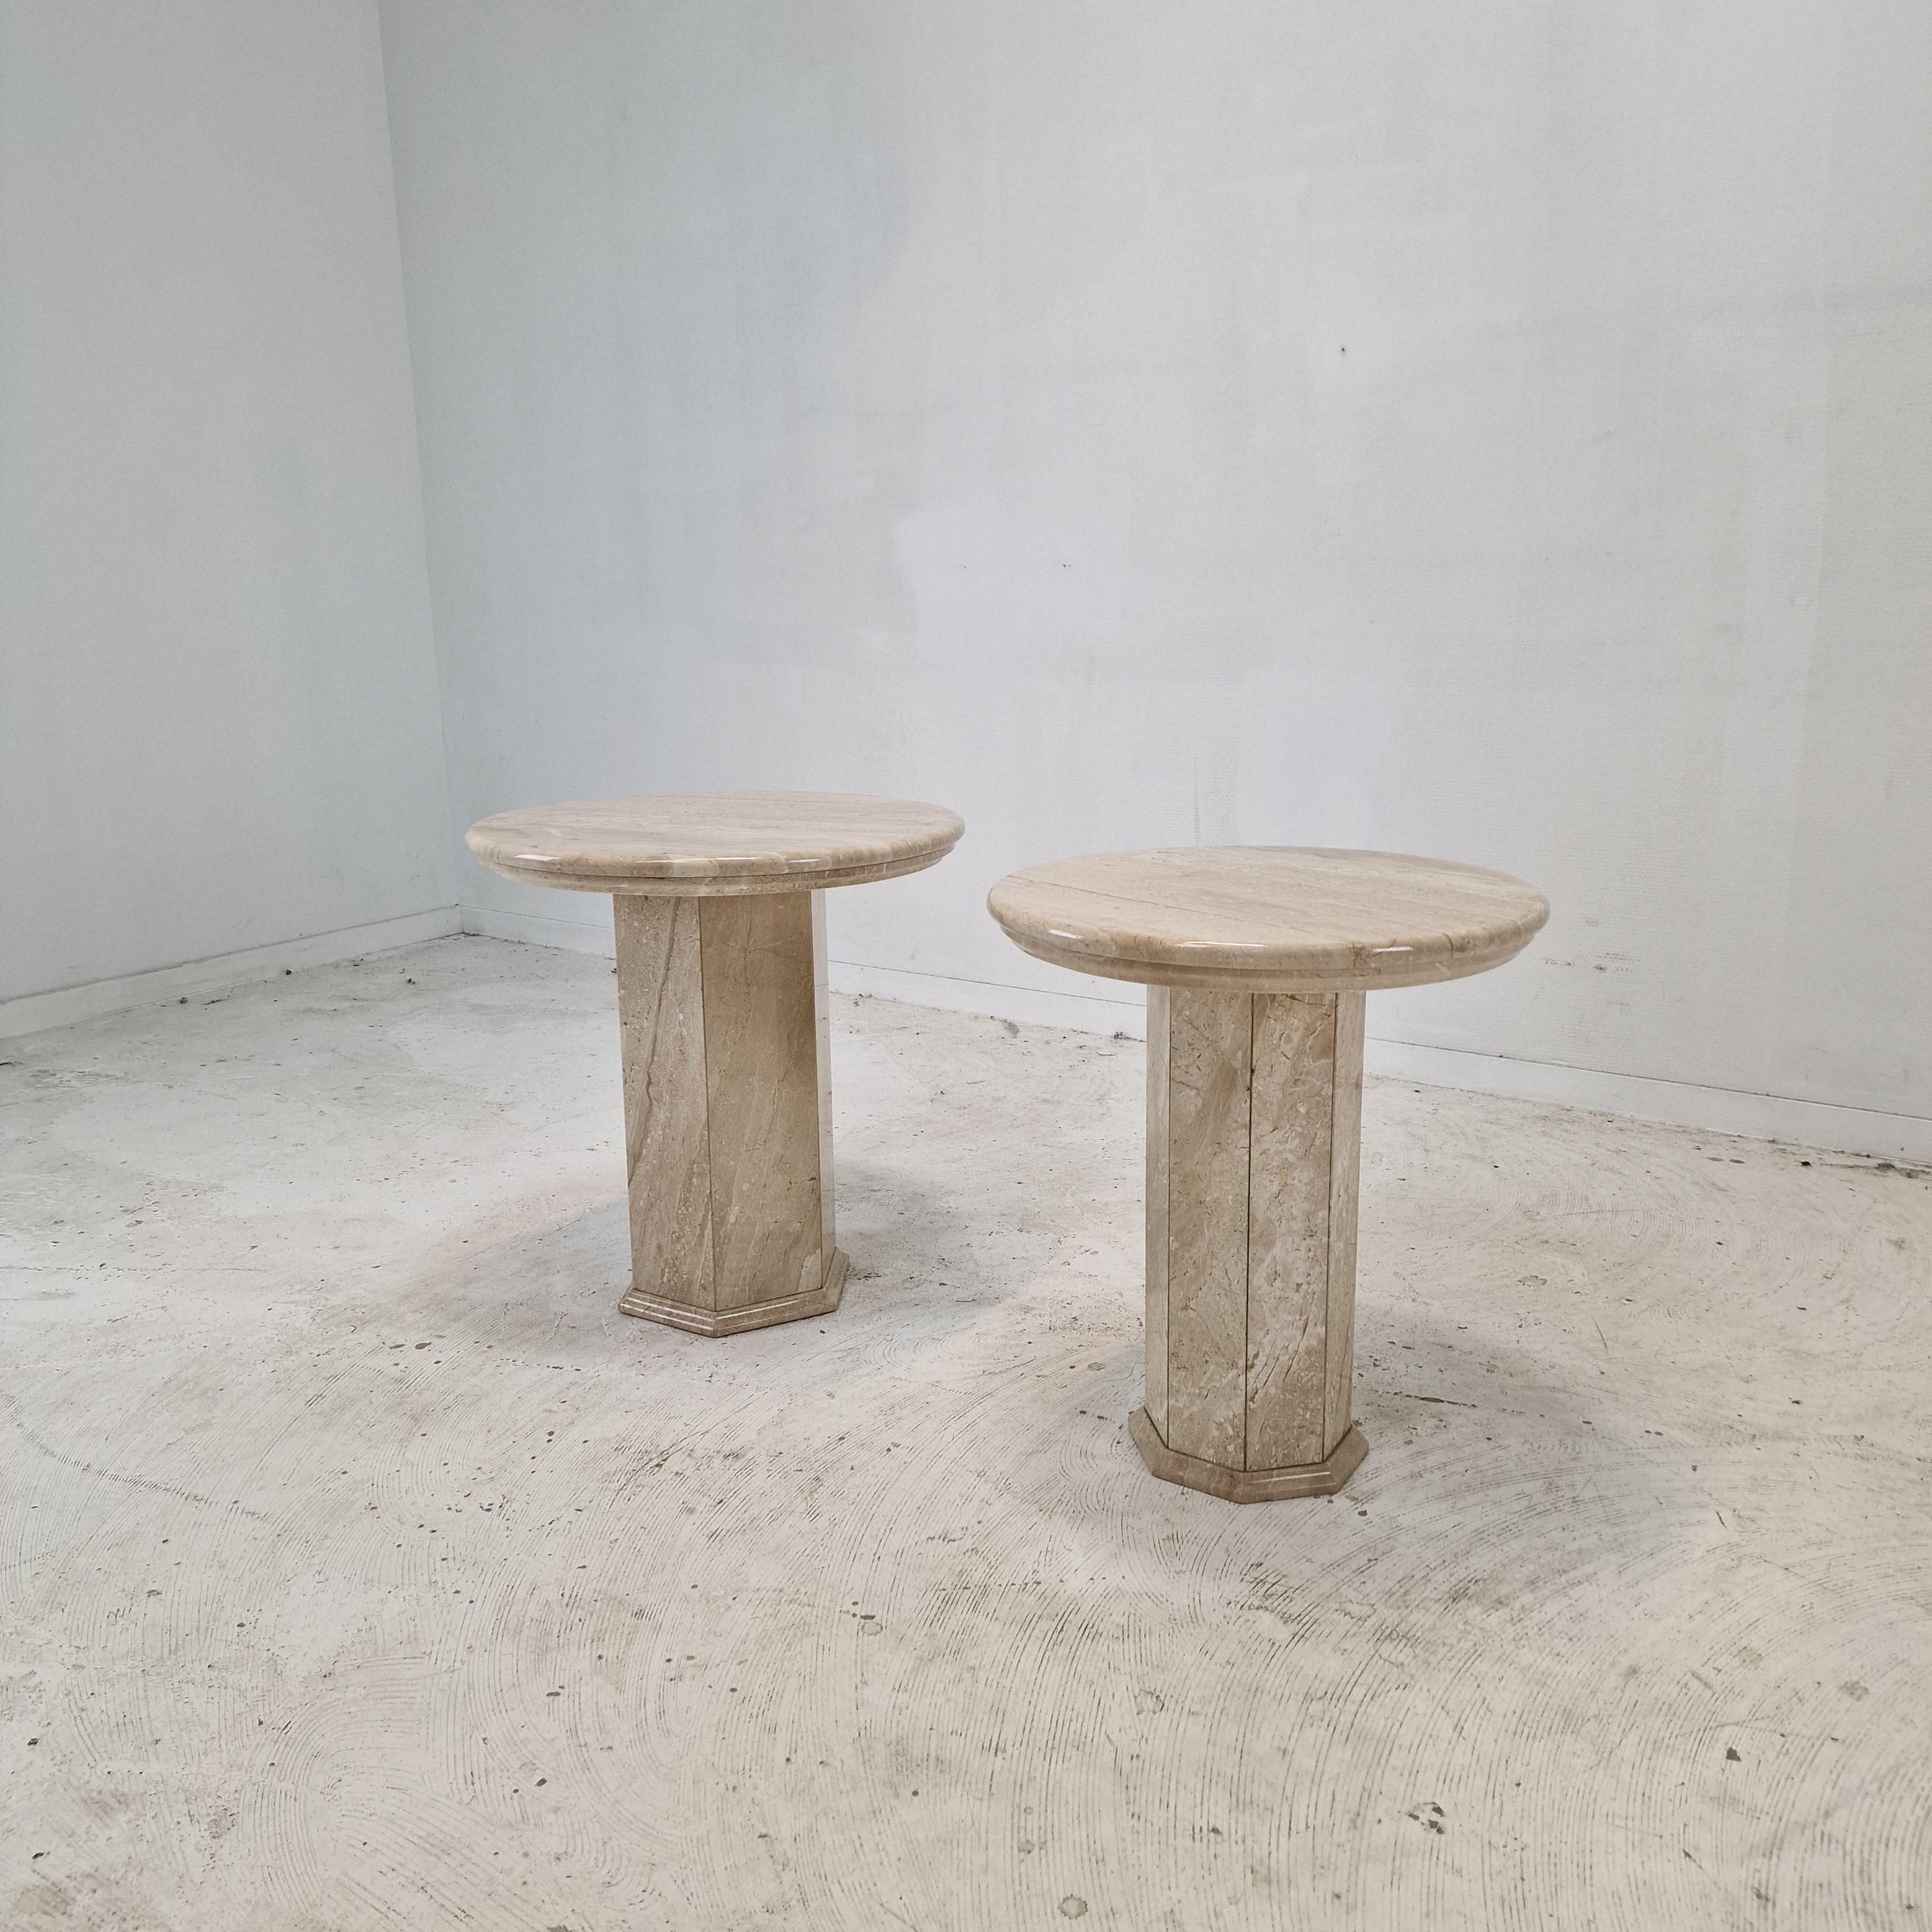 Stunning set of 2 travertine side tables or pedestals, fabricated in Italy in the 80s.

They can be used inside or outside the house.

The plate and the base are made of beautiful travertine.
Please take notice of the very nice patterns.

Size table